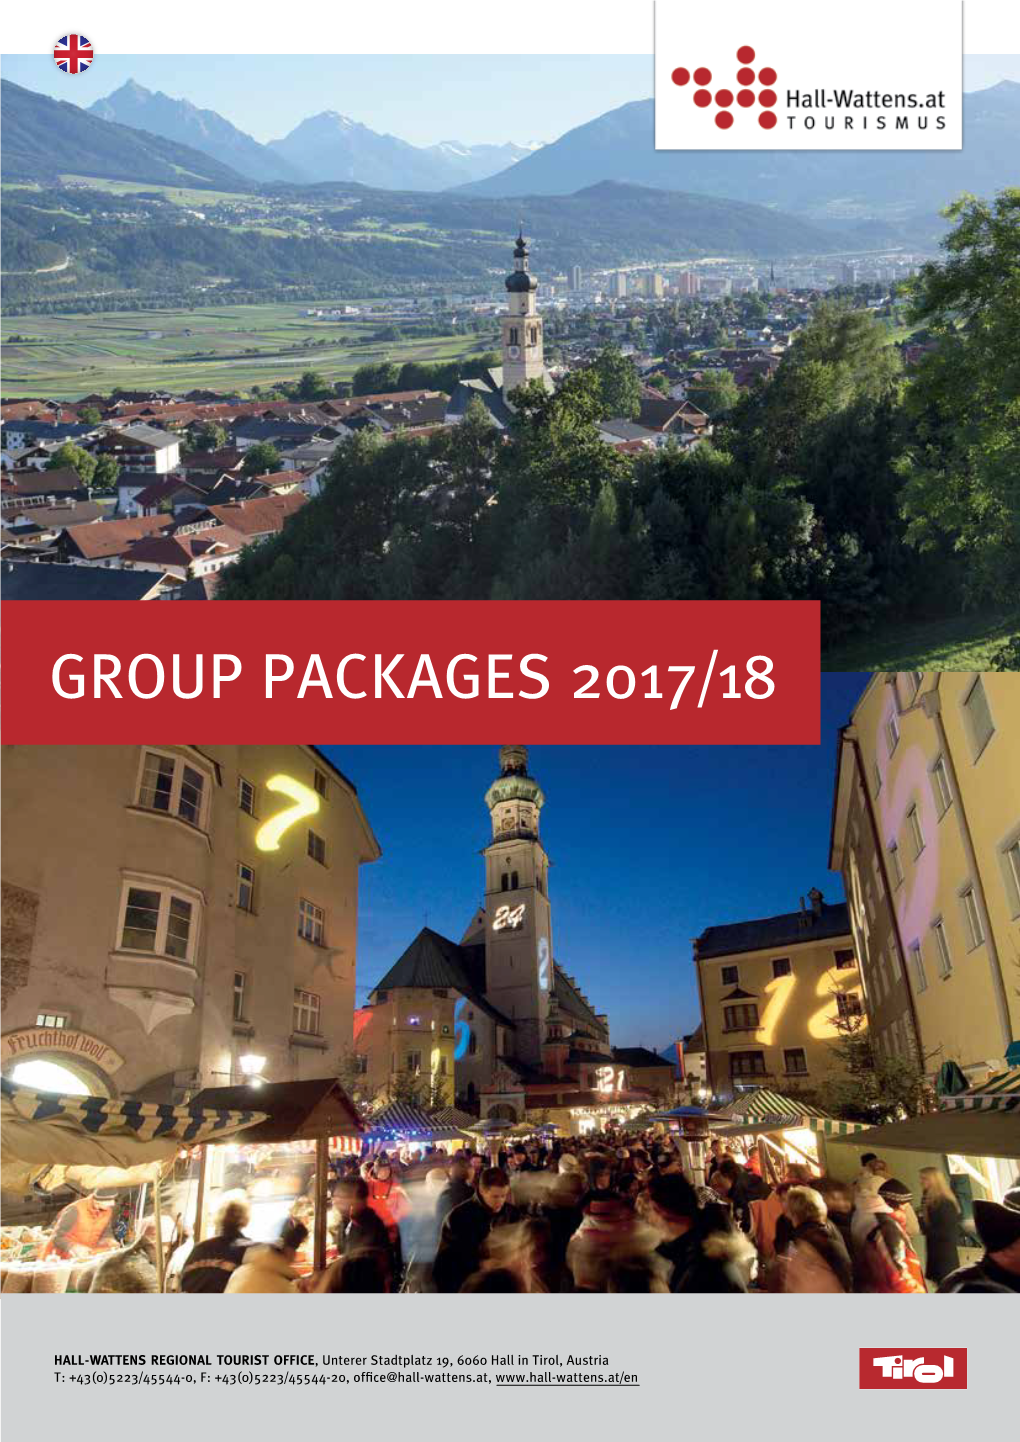 Group Packages 2017/18